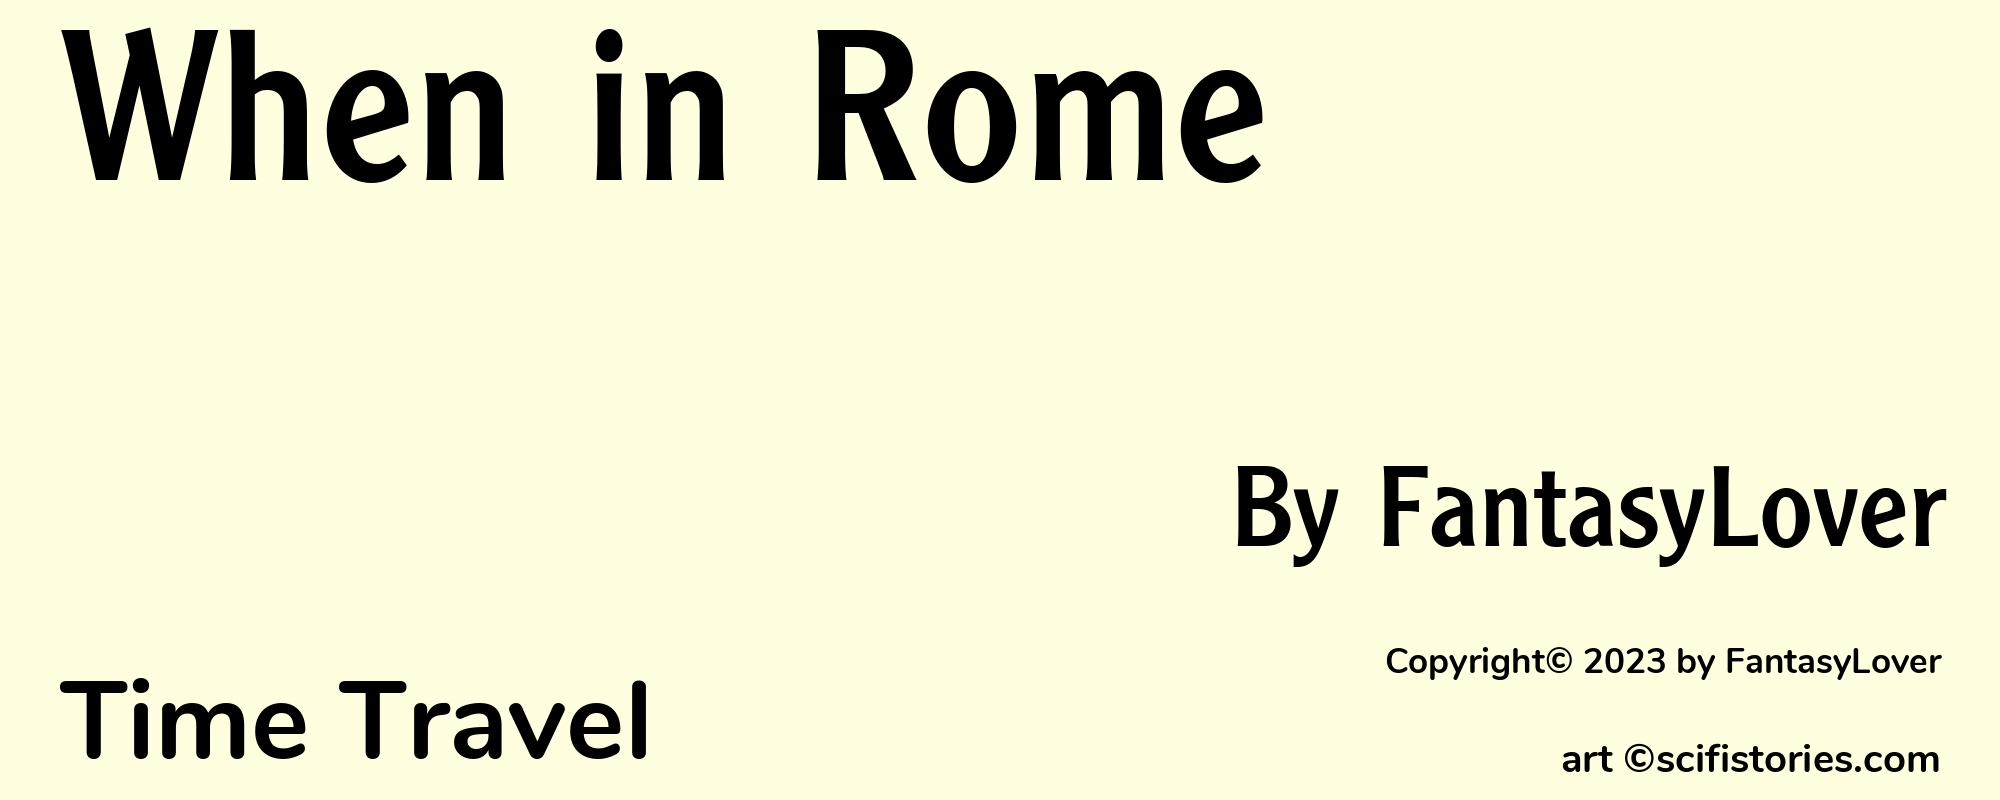 When in Rome - Cover